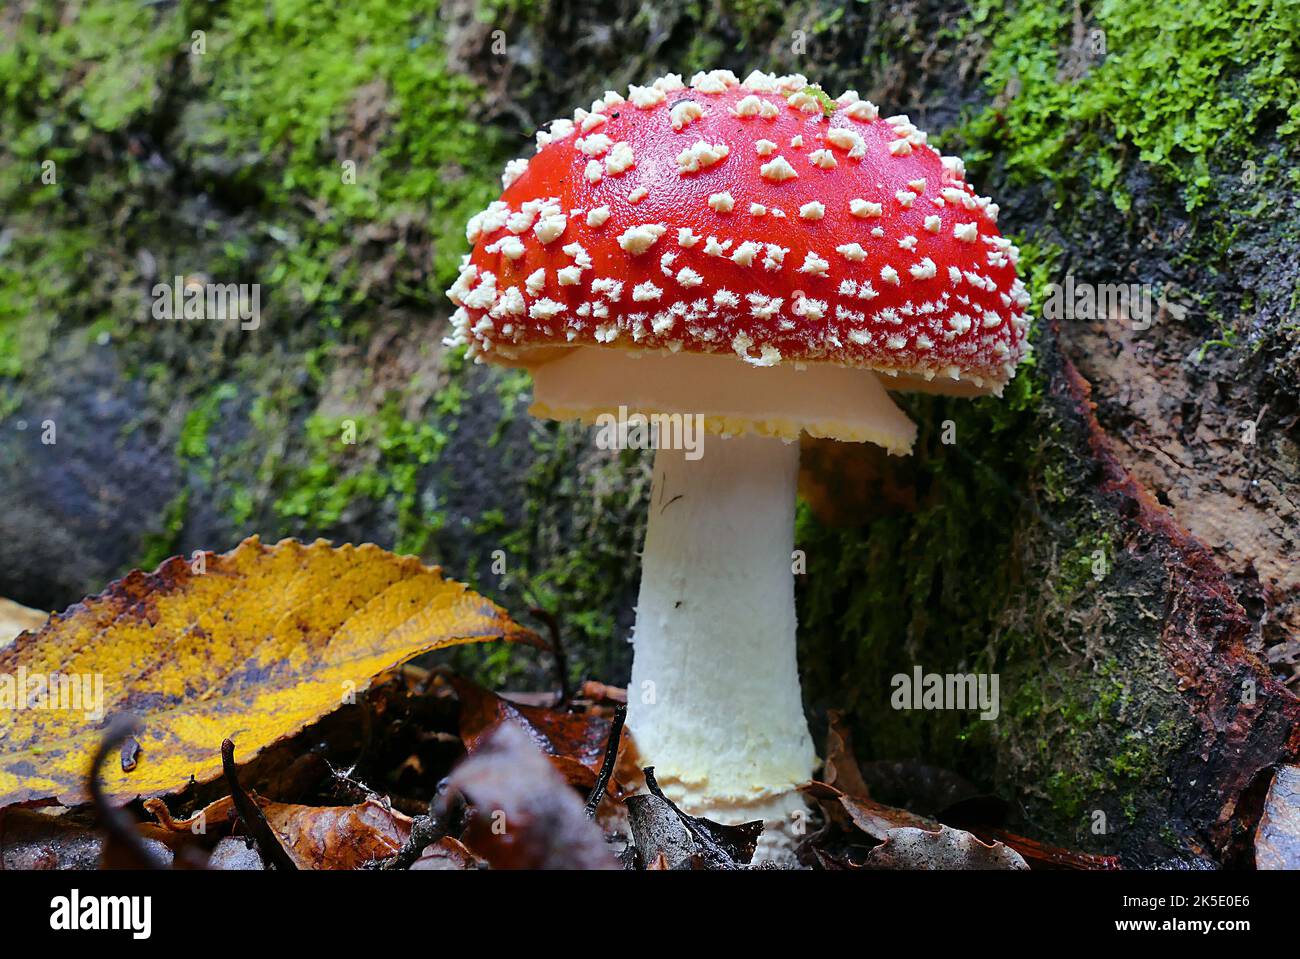 Amanita muscaria, commonly known as the fly agaric or fly amanita, is a basidiomycete of the genus Amanita. It is also a muscimol mushroom. Native throughout the temperate and boreal regions of the Northern Hemisphere, Amanita muscaria has been unintentionally introduced to many countries in the Southern Hemisphere, generally as a symbiont with pine and birch plantations, and is now a true cosmopolitan species. It associates with various deciduous and coniferous trees. Although poisonous, death due to poisoning from A. muscaria ingestion is quite rare. Credit: BSpragg Stock Photo